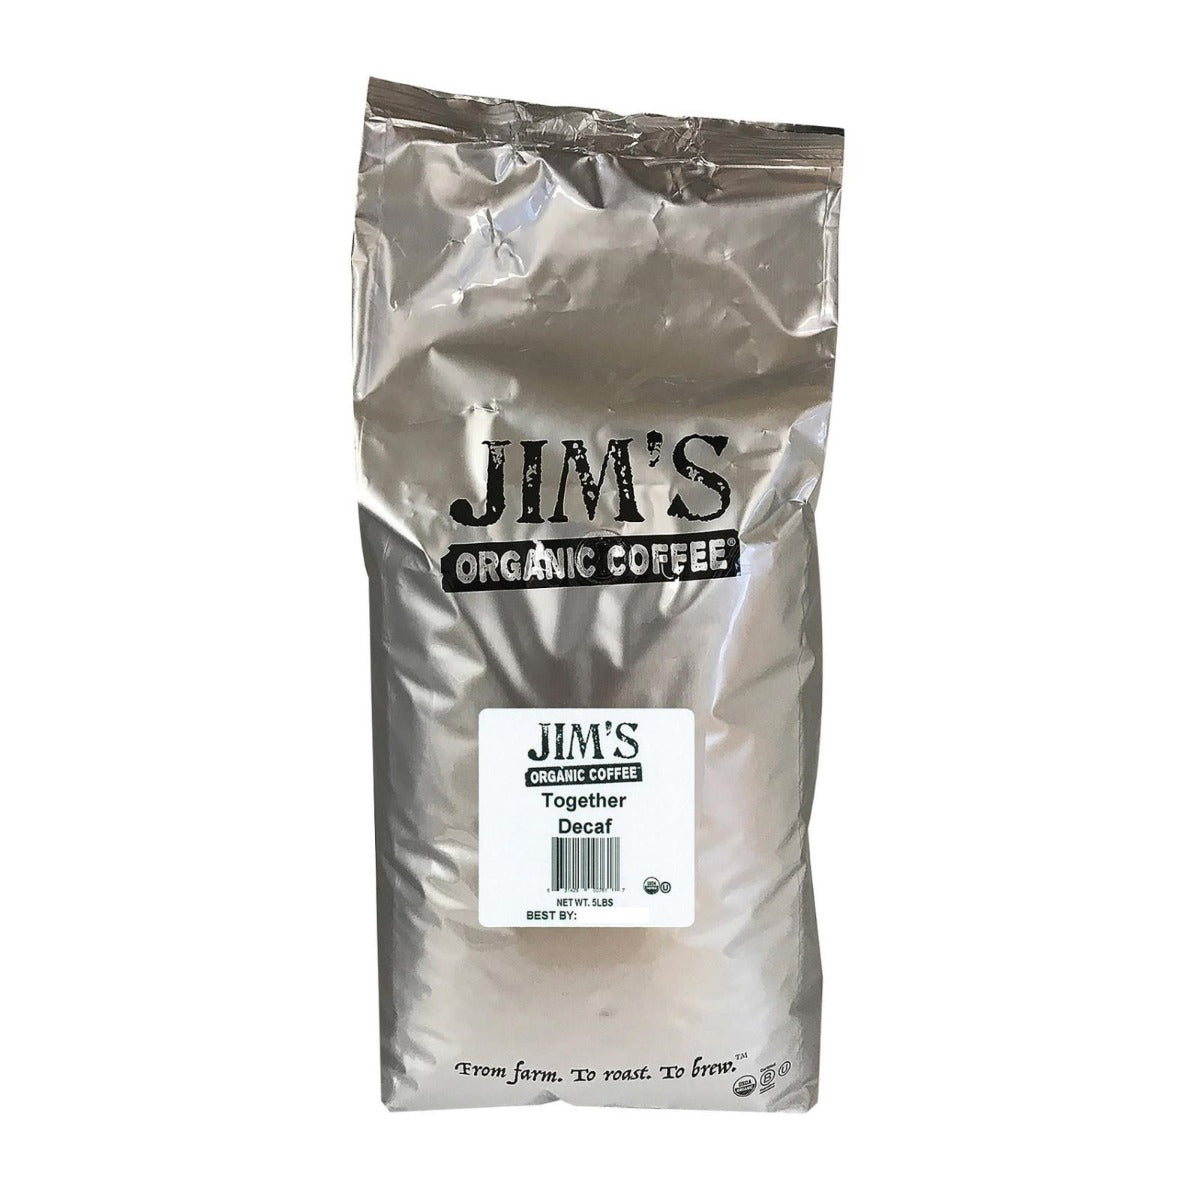 JIMS ORGANIC COFFEE: Organic Together Decaf Coffee, 5 lb - Vending Business Solutions